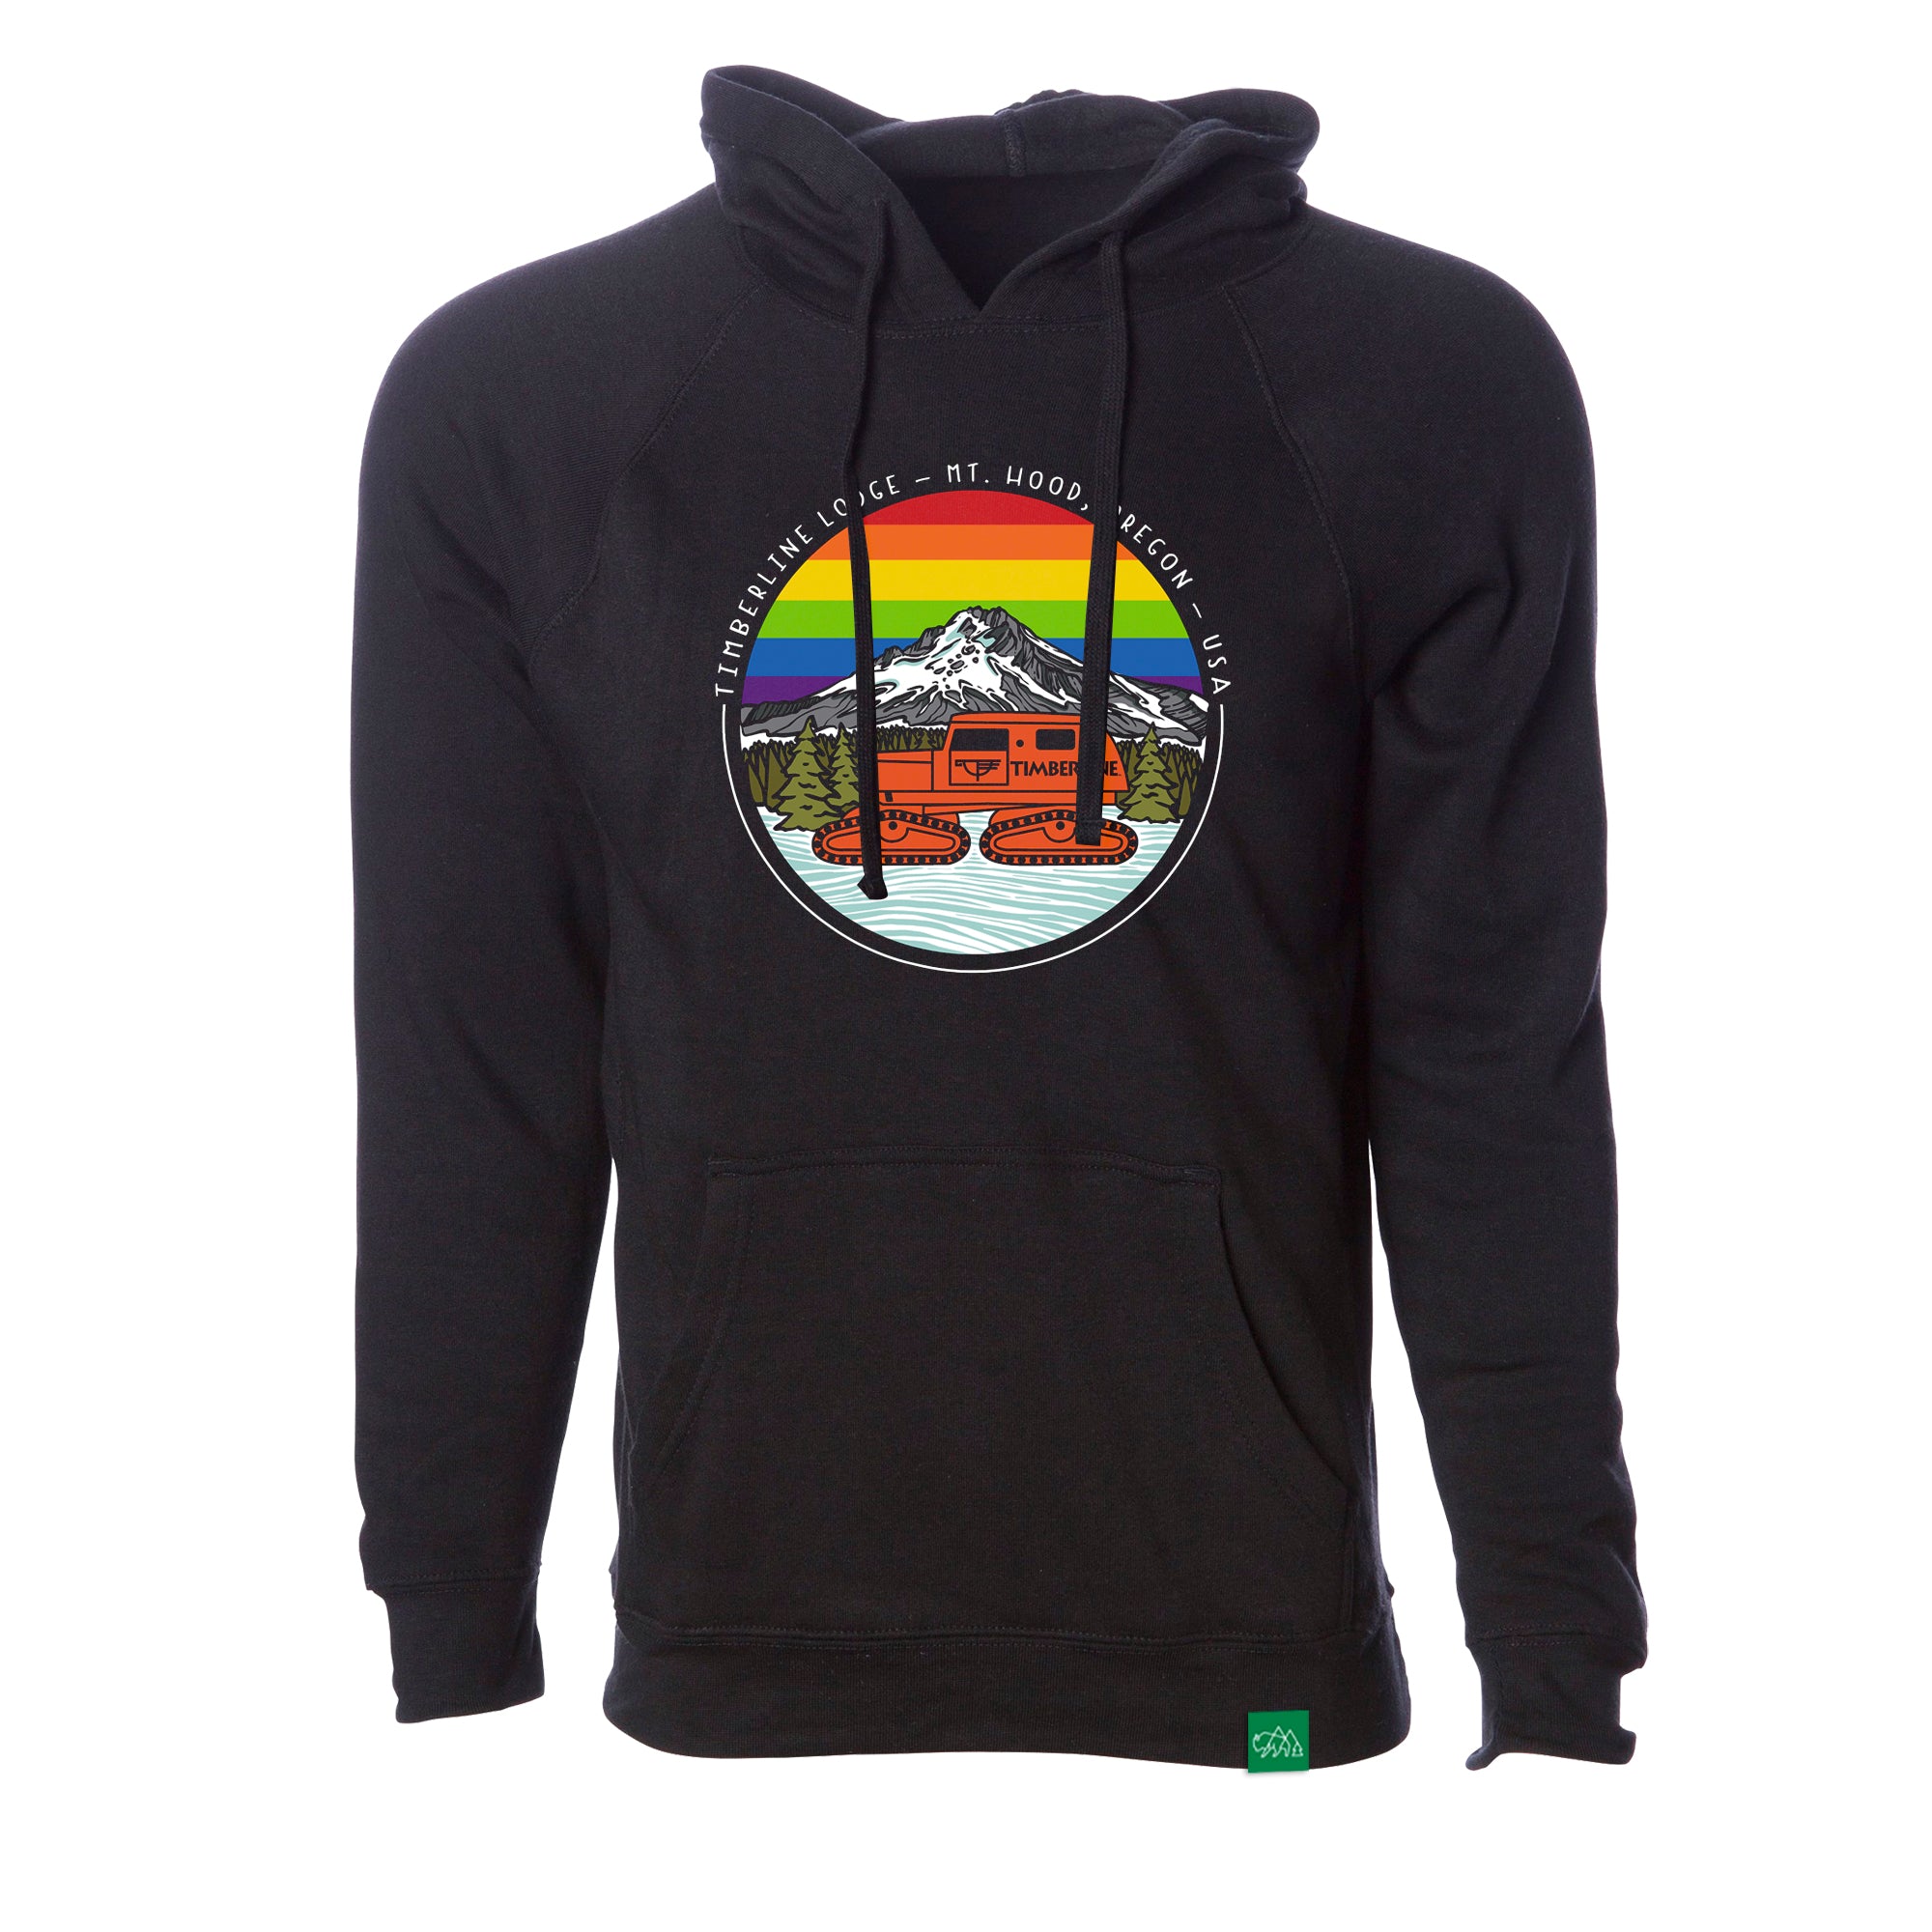 Tucker Pride hoodie with a rainbow mountain graphic design on the chest featuring Mount Hood and a nature-inspired badge by Timberline Lodge.